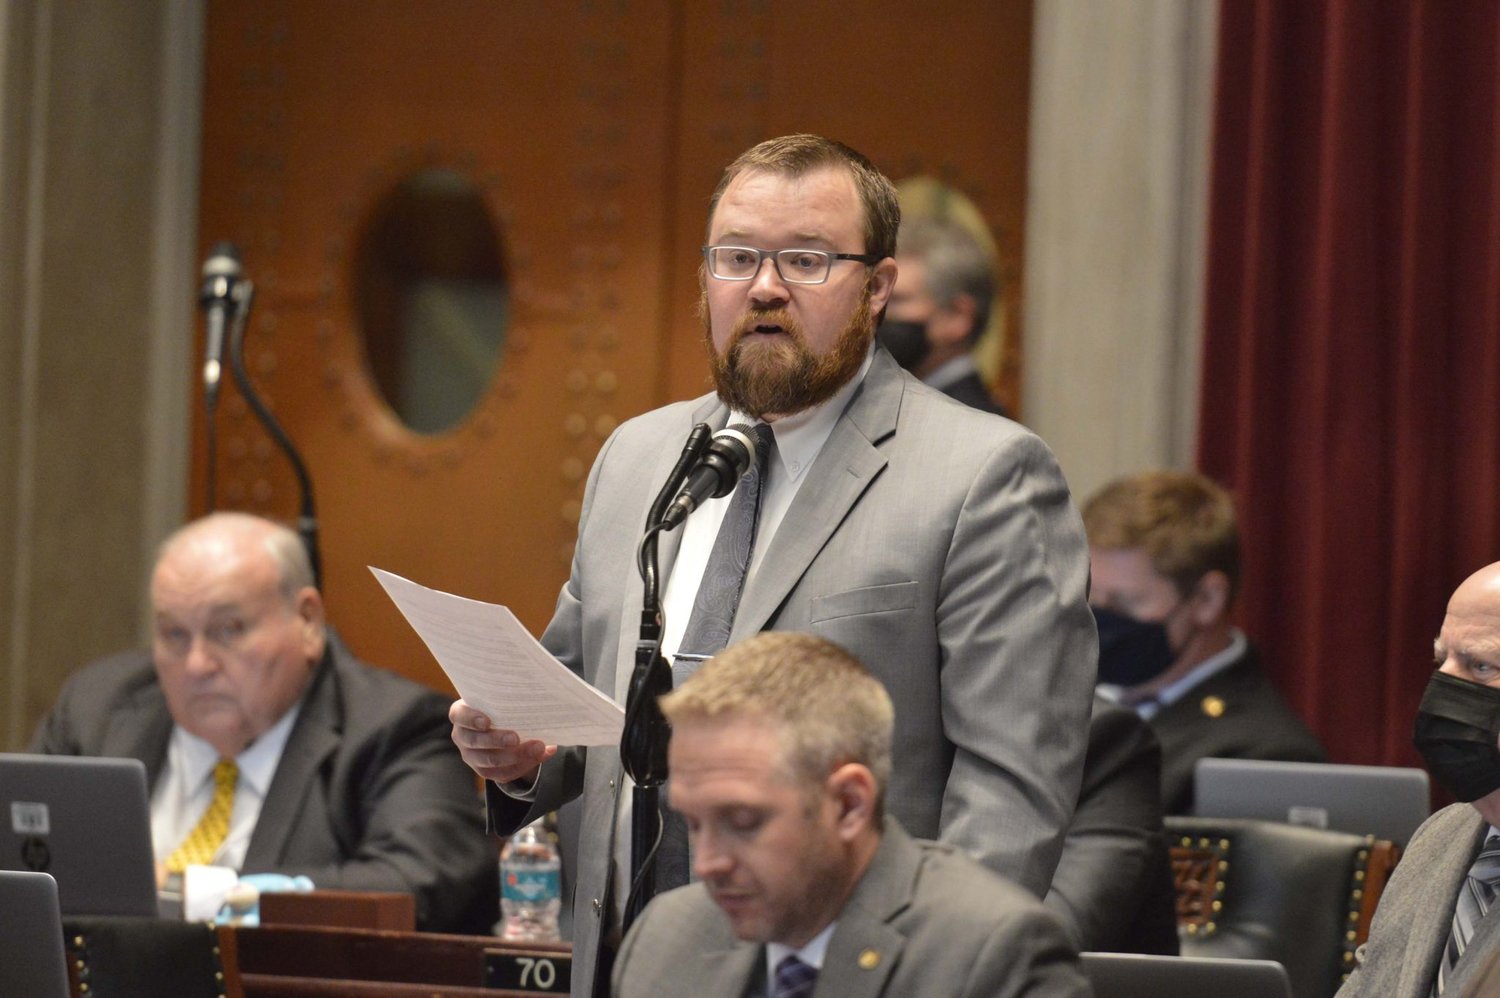 Former state Rep. Jered Taylor, R-Republic, championed the “Personal Privacy Protection Act” during his time in the Missouri House.